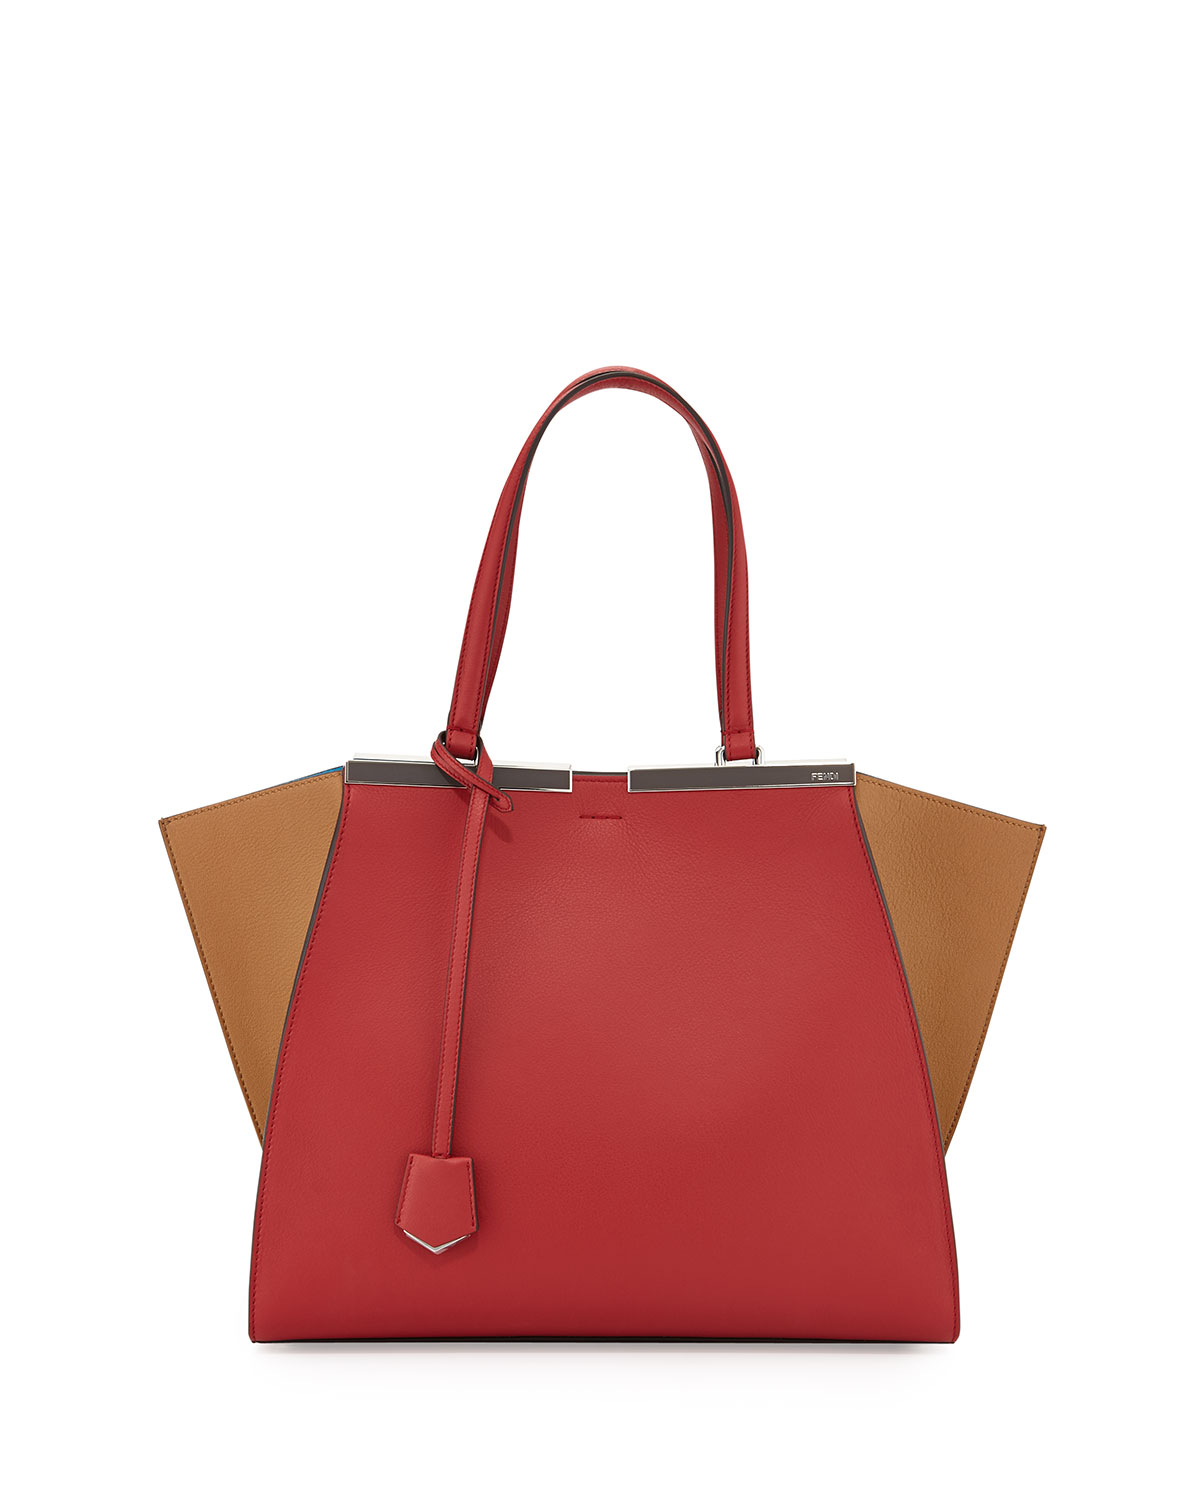 Lyst - Fendi Trois-Jour Mini Tricolor Shopping Tote Bag in Red